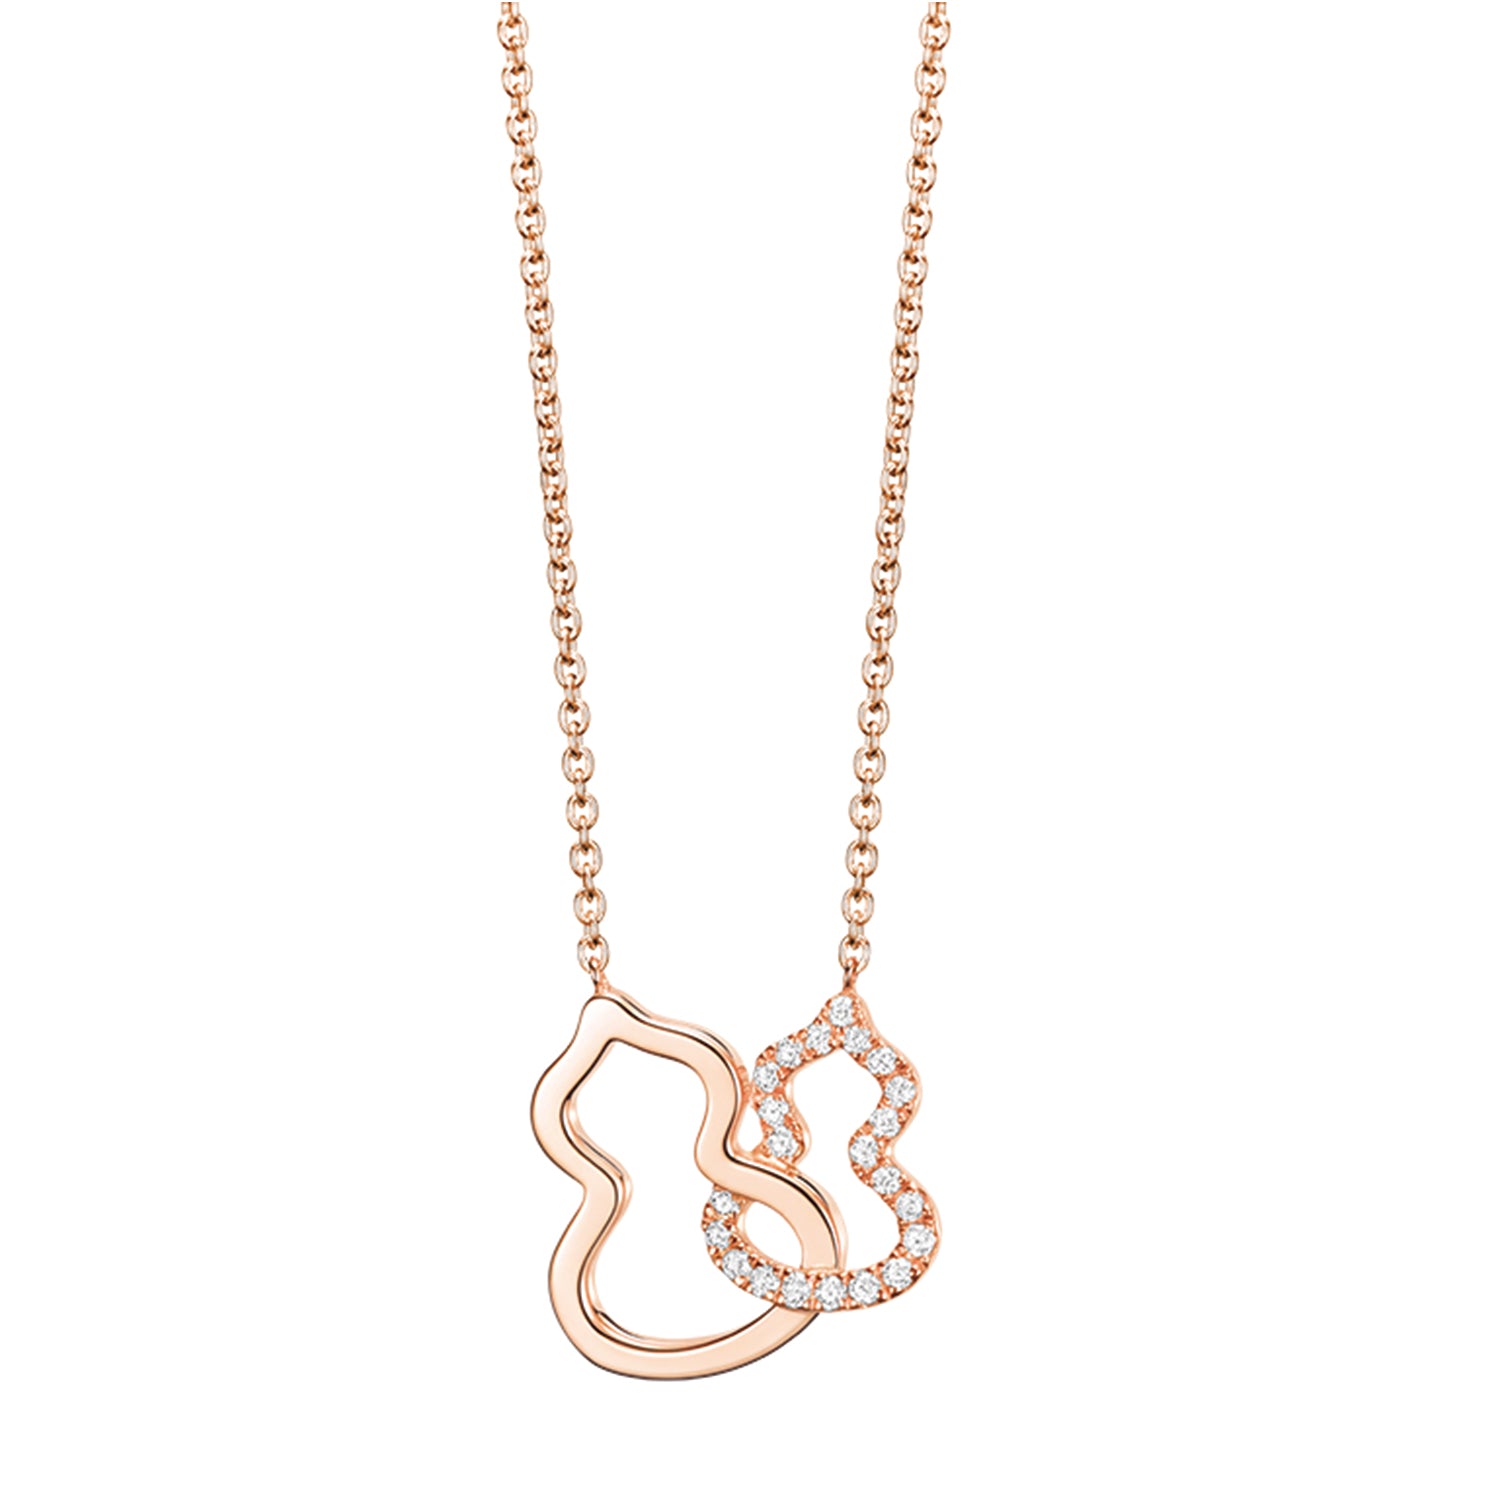 Petite Double Wulu necklace in 18K rose gold with diamonds